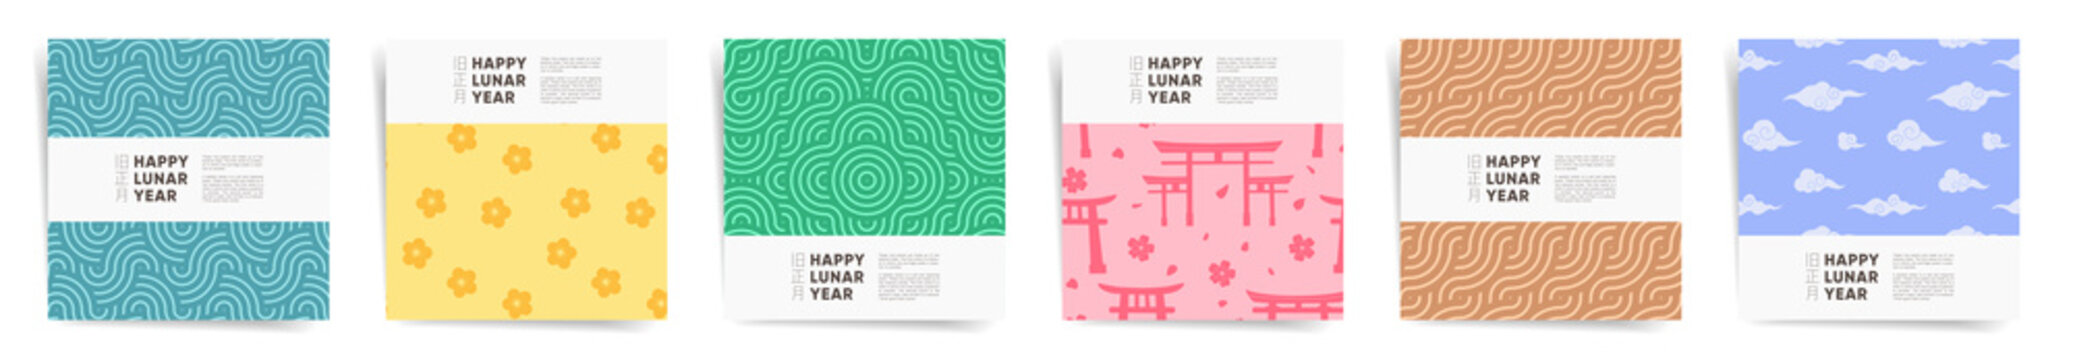 Japanese lunar year post. Social media square post design template with asian aesthetic, floral  patterns. Blue, green, pink, yellow colors geometric illustrations - torii gate, clouds, sakura. Vector